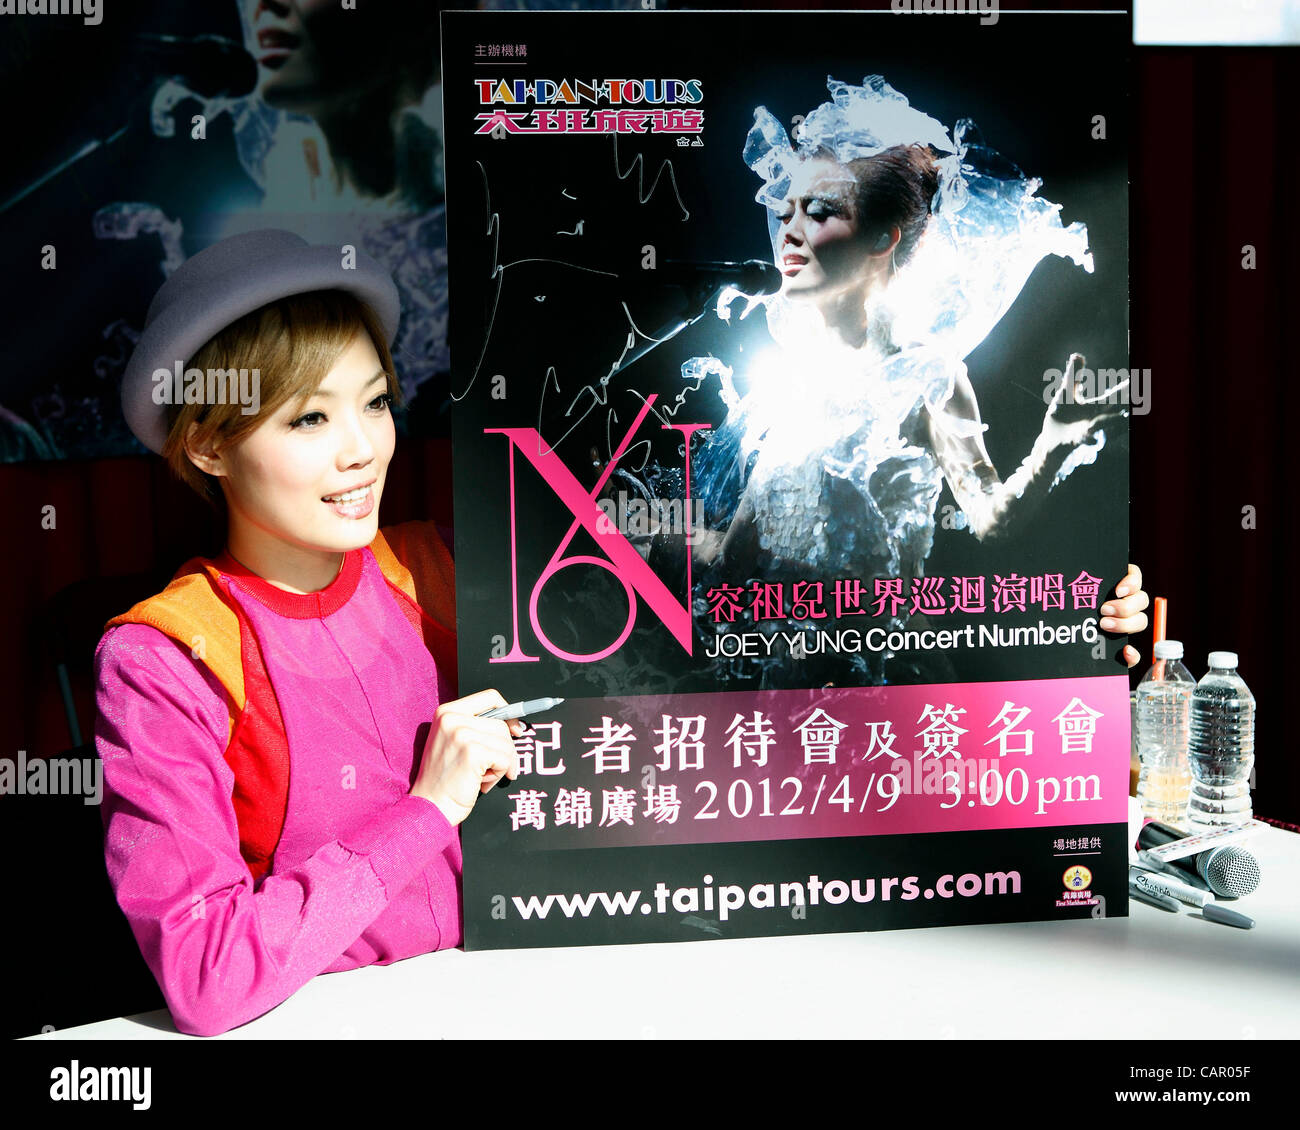 April 9, 2012 - Toronto, Canada - Hong Kong Cantopop singer and actress Joey Yung attends the Concert Number 6 press conference and autograph signing session at the First Markham Place. Yung is scheduled to perform at Casino Rama on April 10, 2012. (JKP/N8N) Stock Photo